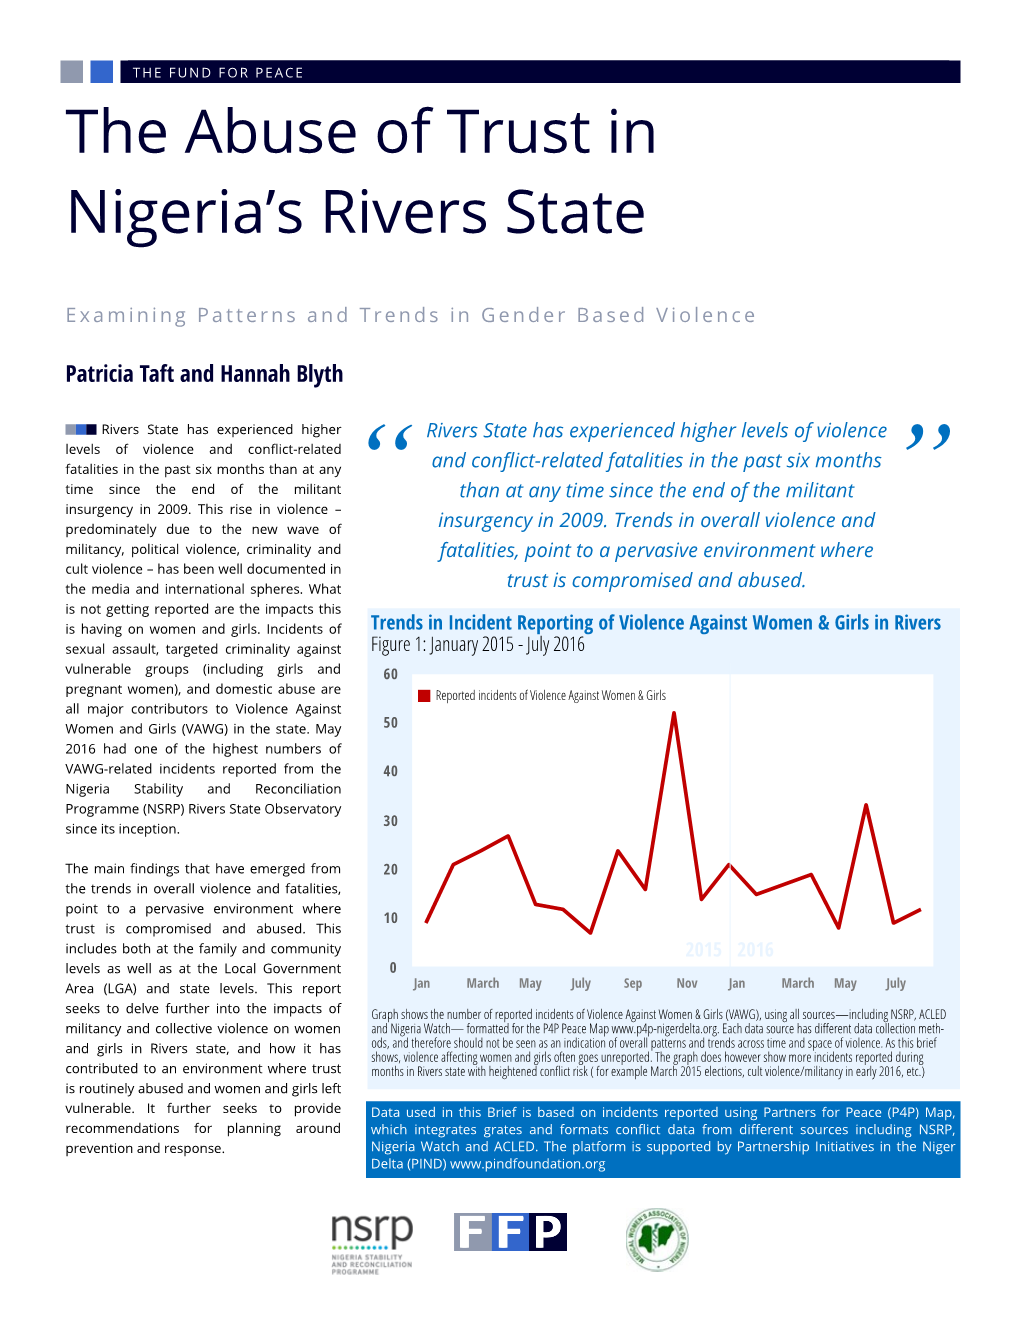 The Abuse of Trust in Nigeria's Rivers State